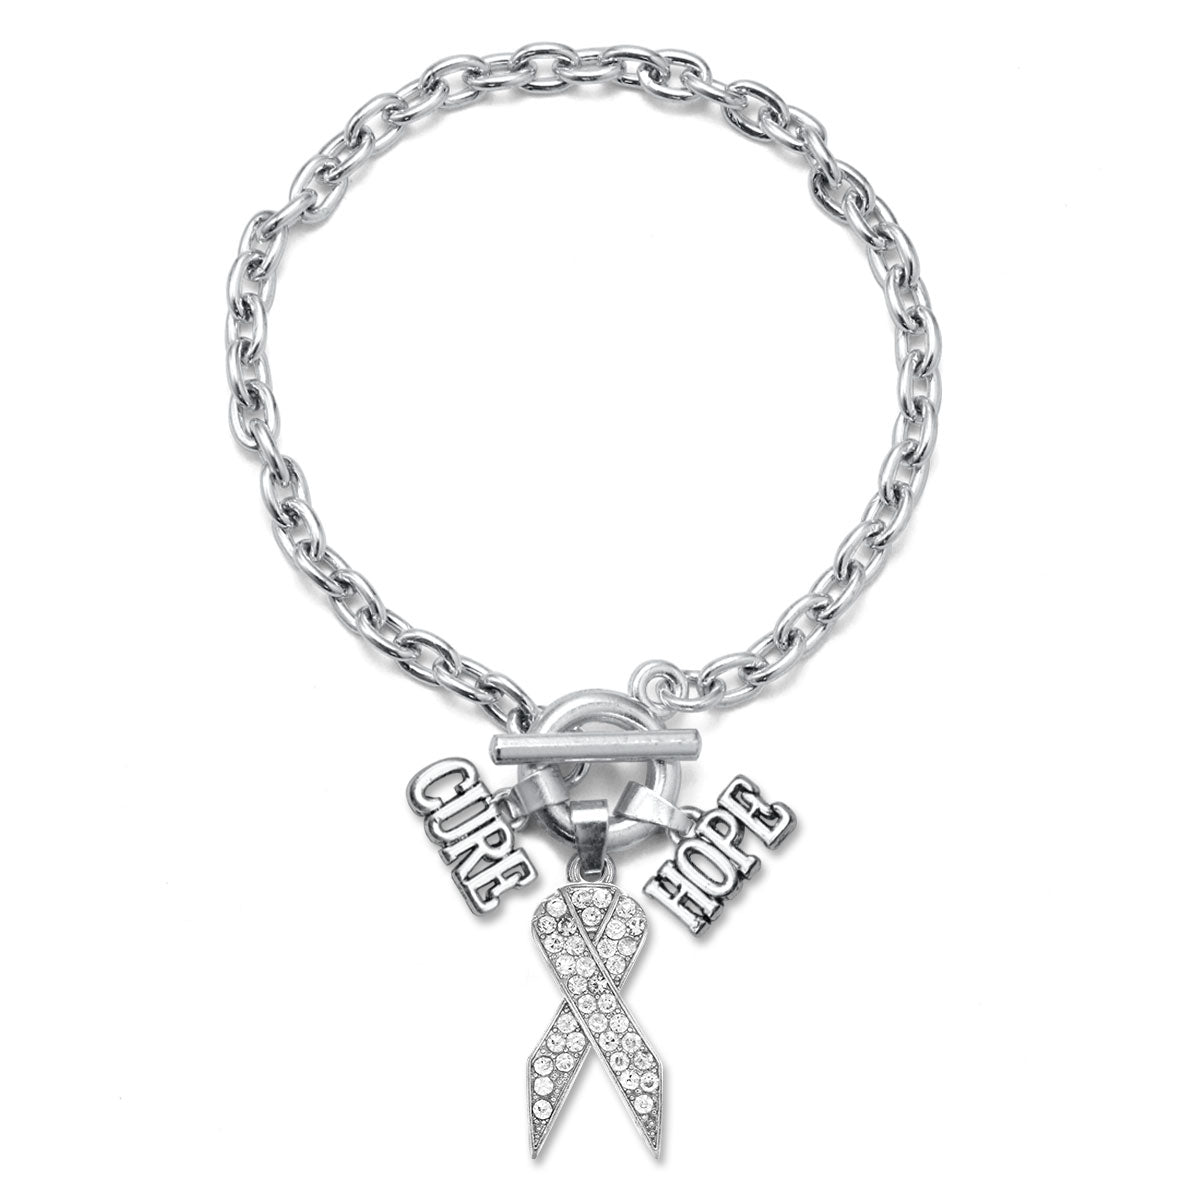 Silver Hope Clear Awareness Ribbon Charm Toggle Bracelet